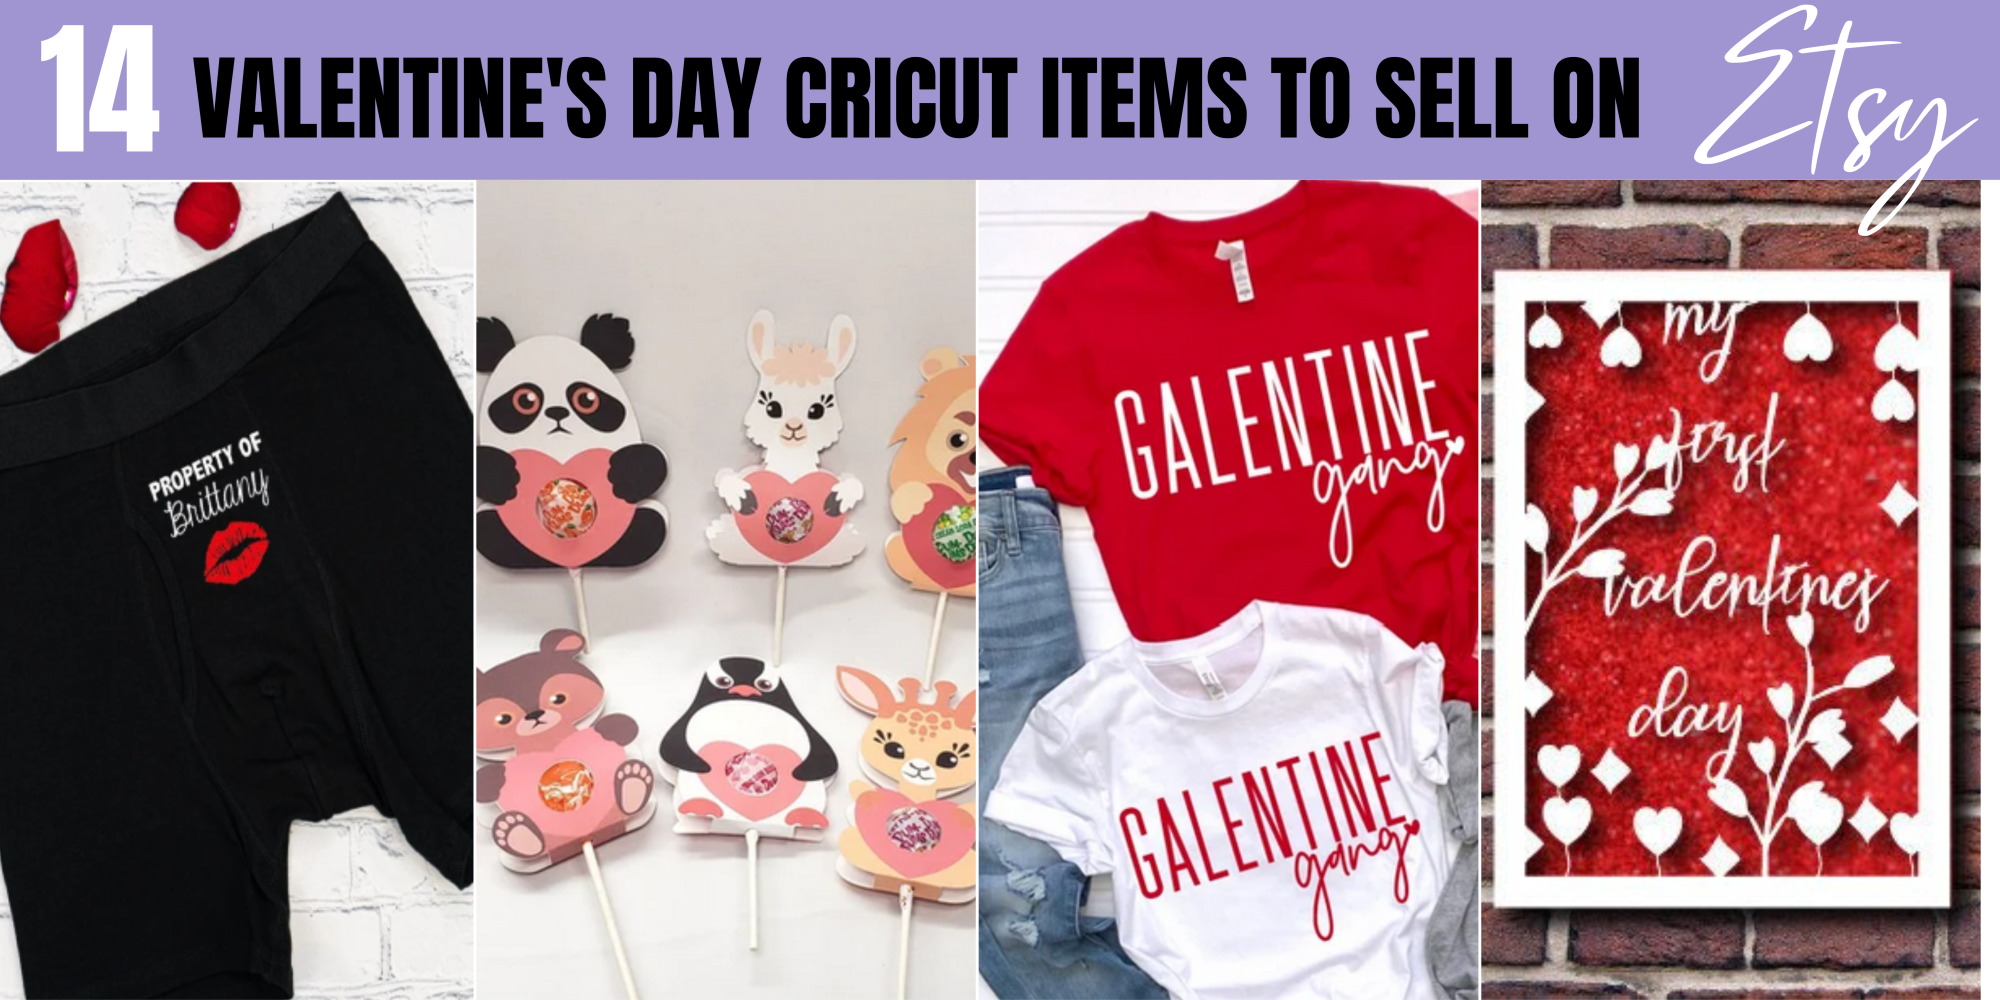 14 Valentine's Cricut Ideas To Sell On Etsy